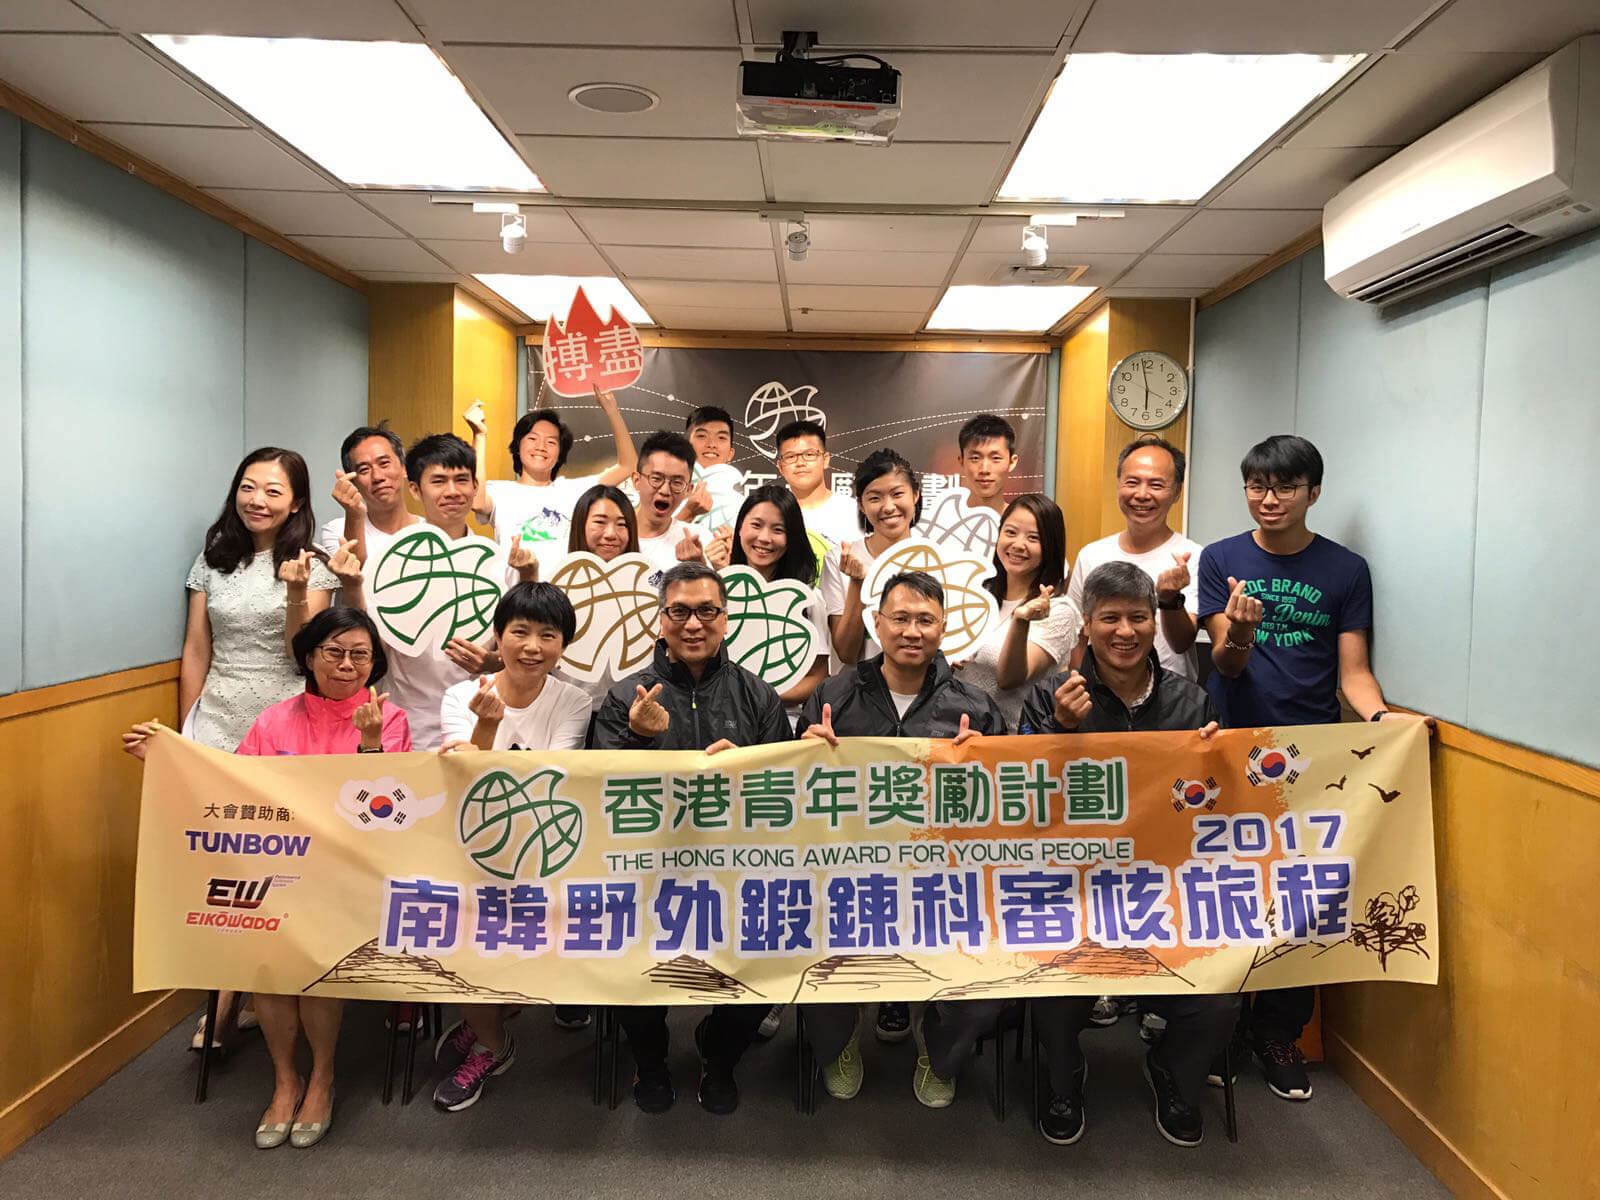 Launching Ceremony of Gold Level Expeditions Course for School Leavers in South Korea (27/07/2017)